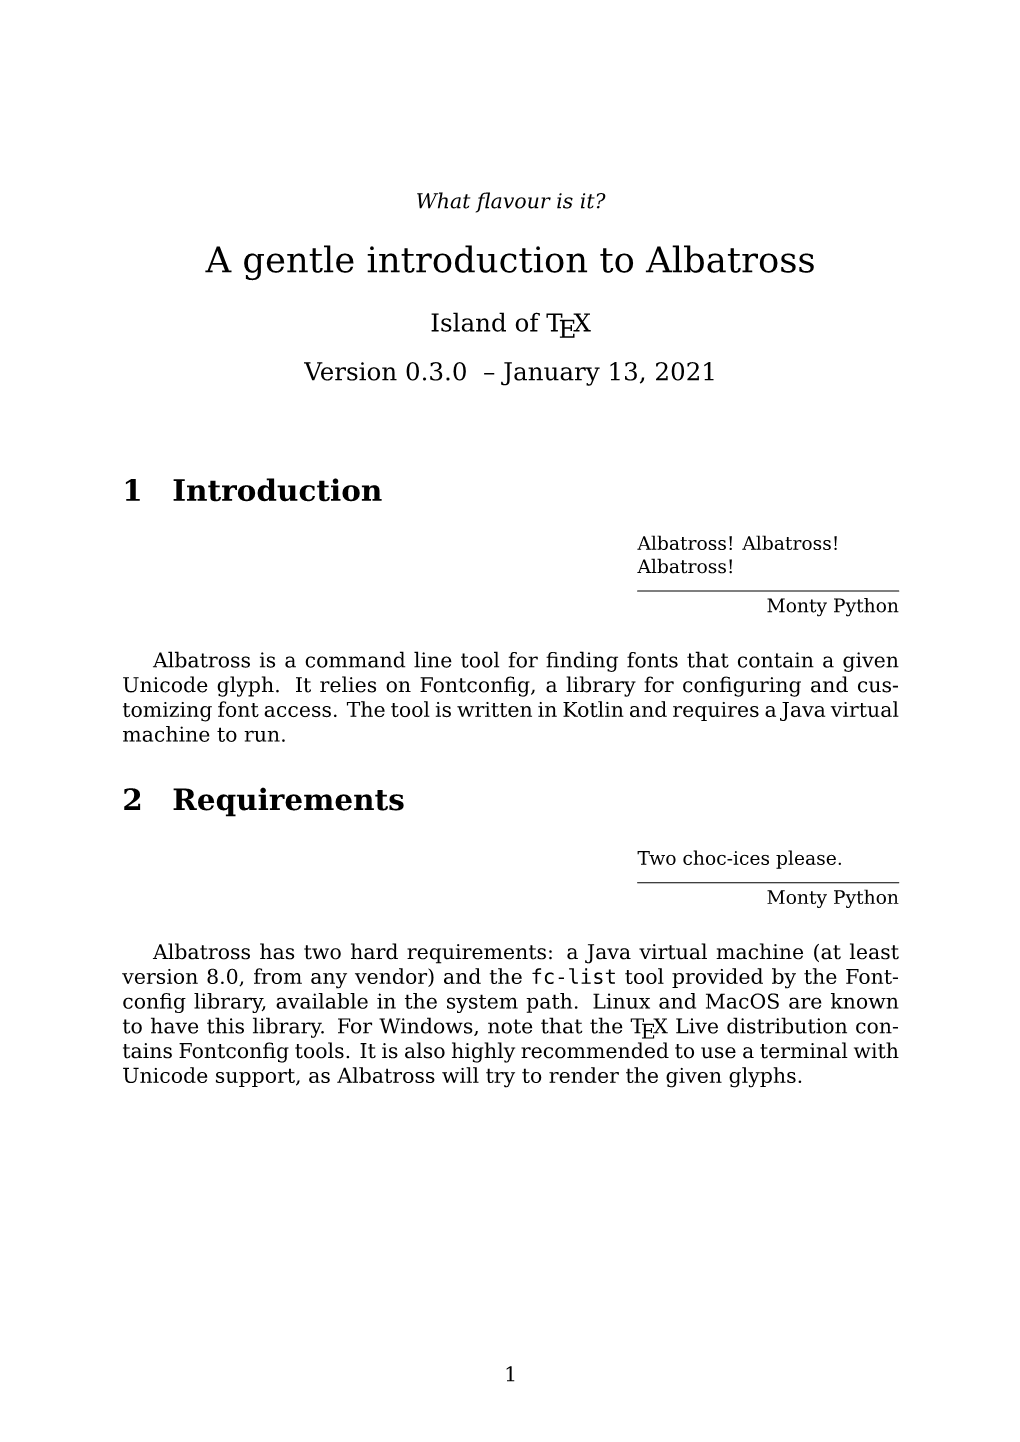 A Gentle Introduction to Albatross